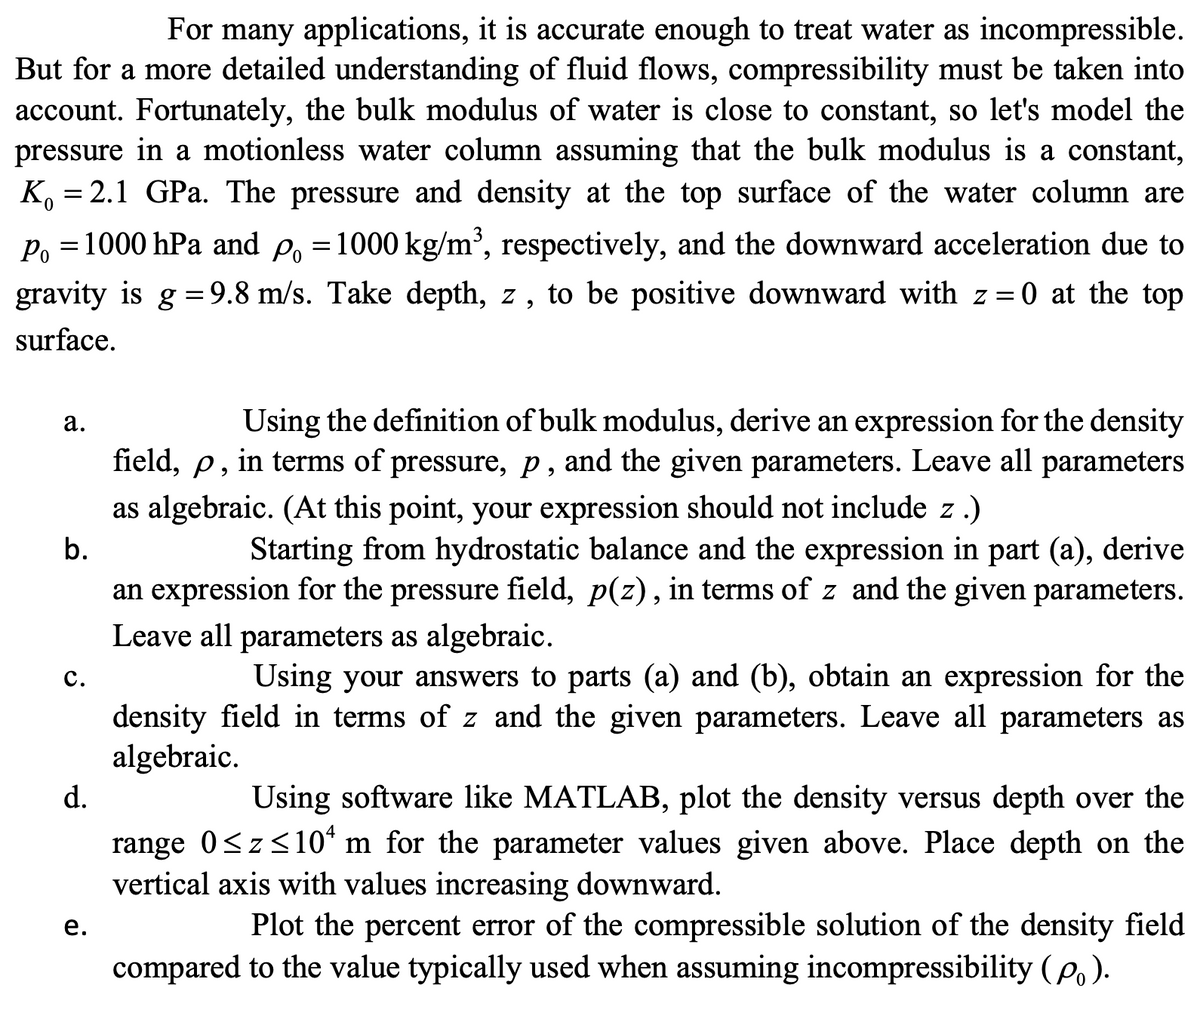 For many applications, it is accurate enough to treat water as incompressible.
But for a more detailed understanding of fluid flows, compressibility must be taken into
account. Fortunately, the bulk modulus of water is close to constant, so let's model the
pressure in a motionless water column assuming that the bulk modulus is a constant,
K, = 2.1 GPa. The pressure and density at the top surface of the water column are
6.
Po =1000 hPa and P, =1000 kg/m², respectively, and the downward acceleration due to
gravity is g =9.8 m/s. Take depth, z, to be positive downward with z = 0 at the top
%3D
%3D
%3D
surface.
Using the definition of bulk modulus, derive an expression for the density
field, p, in terms of pressure, p, and the given parameters. Leave all parameters
а.
as algebraic. (At this point, your expression should not include z .)
b.
Starting from hydrostatic balance and the expression in part (a), derive
an expression for the pressure field, p(z), in terms of z and the given parameters.
Leave all parameters as algebraic.
с.
Using your answers to parts (a) and (b), obtain an expression for the
density field in terms of z and the given parameters. Leave all parameters as
algebraic.
d.
Using software like MATLAB, plot the density versus depth over the
range 0<z<10* m for the parameter values given above. Place depth on the
vertical axis with values increasing downward.
Plot the percent error of the compressible solution of the density field
compared to the value typically used when assuming incompressibility (po).
е.
